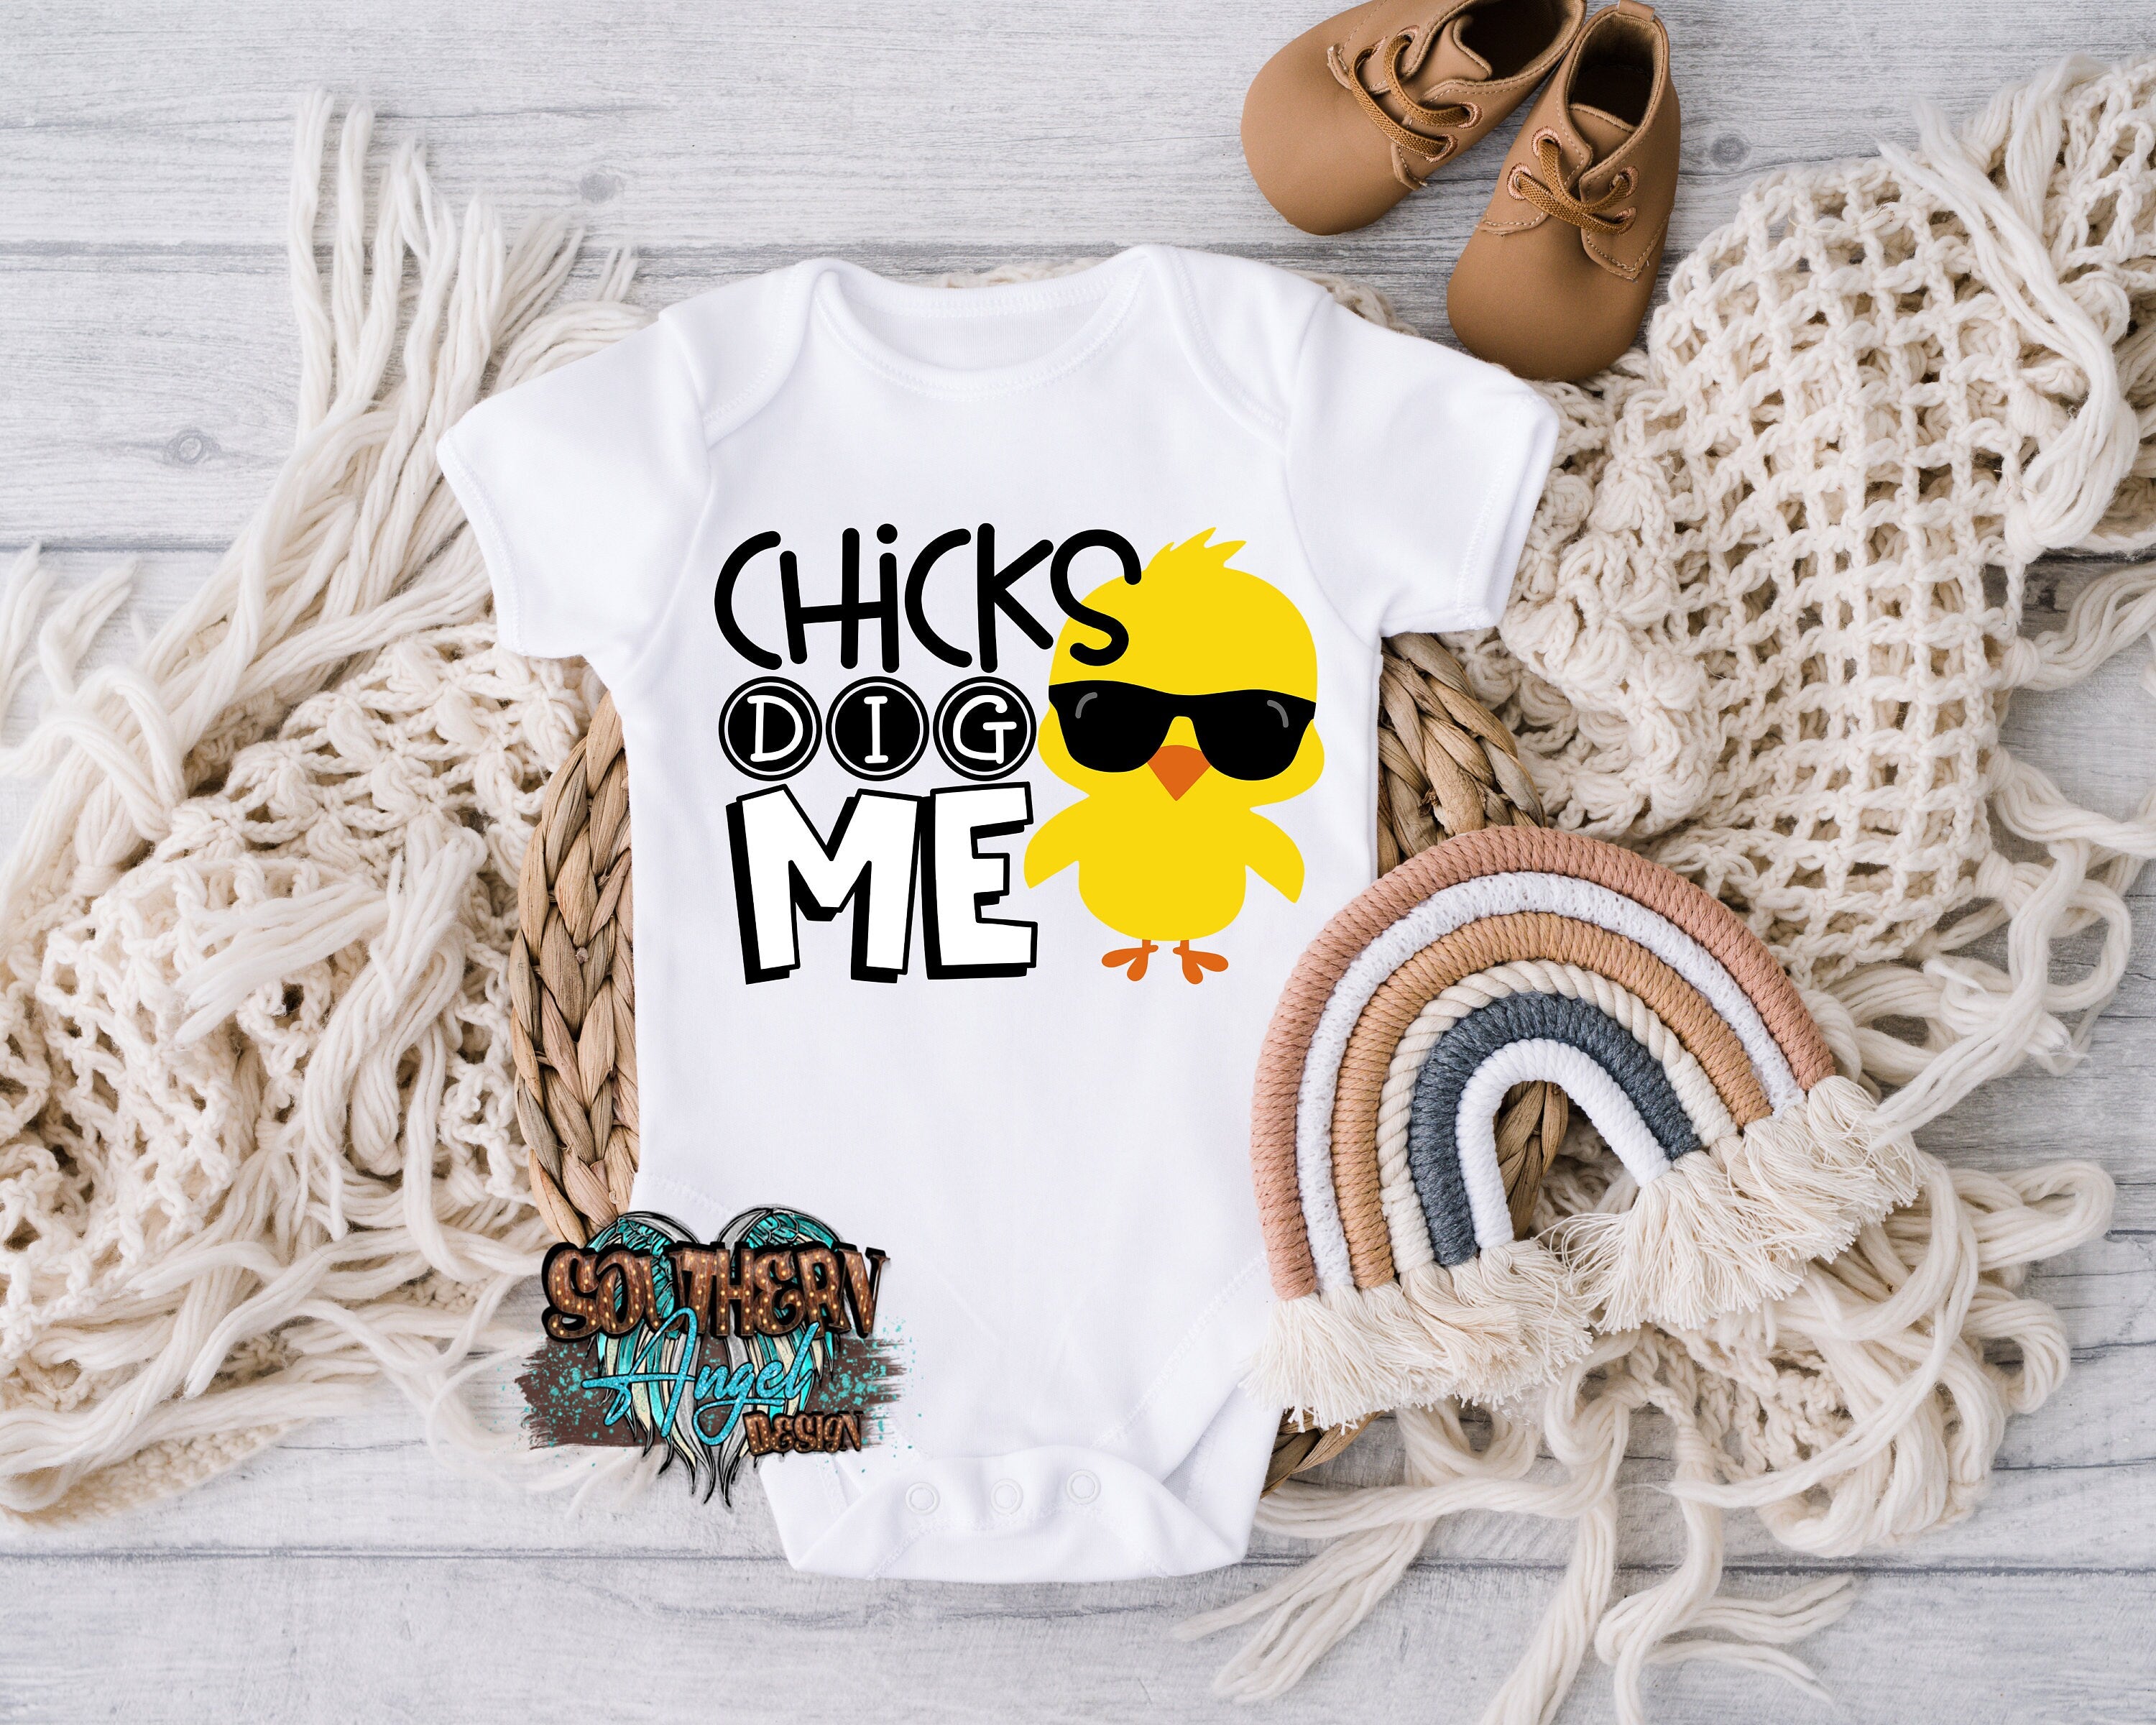 Boy's Easter shirt, Chicks Dig Me shirt, Toddler Easter shirt, Kids Easter shirt, Easter Bunny shirt, Girls Easter shirt, Baby Easter outfit